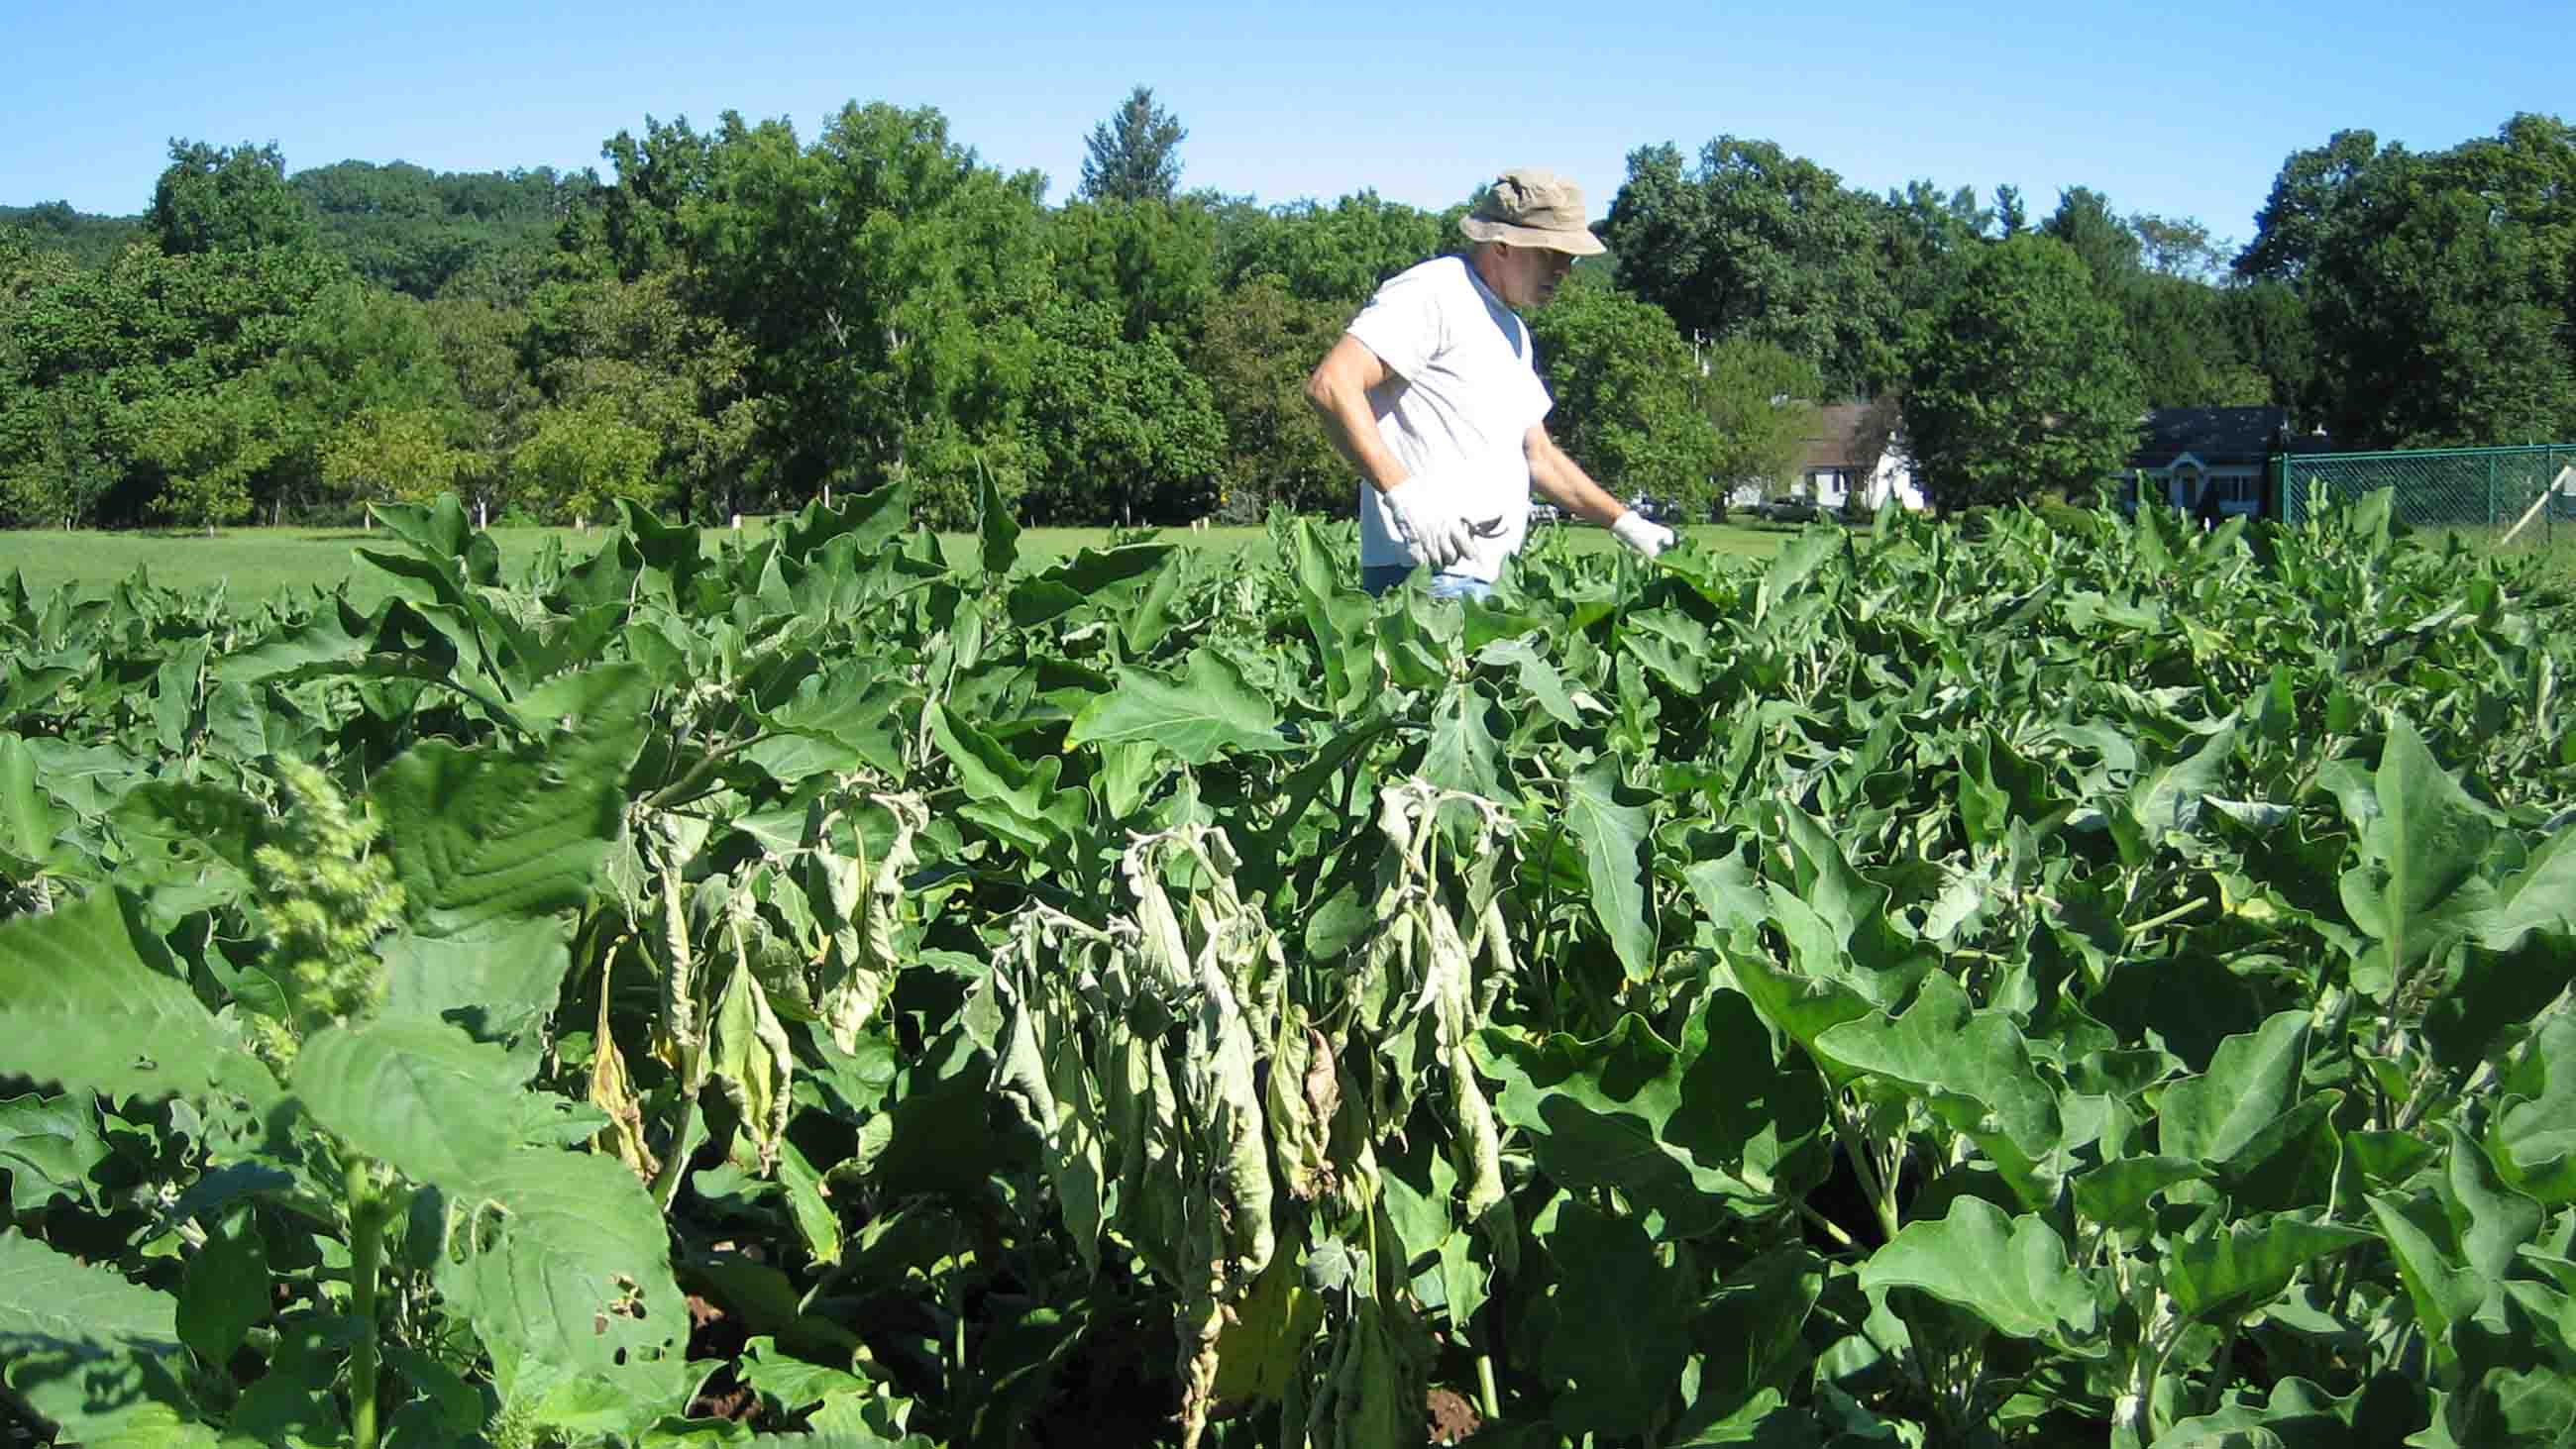 Peter Thiel, a research technician at the Connecticut Agricultural Experiment Station, checks up on fields of experimental eggplants.